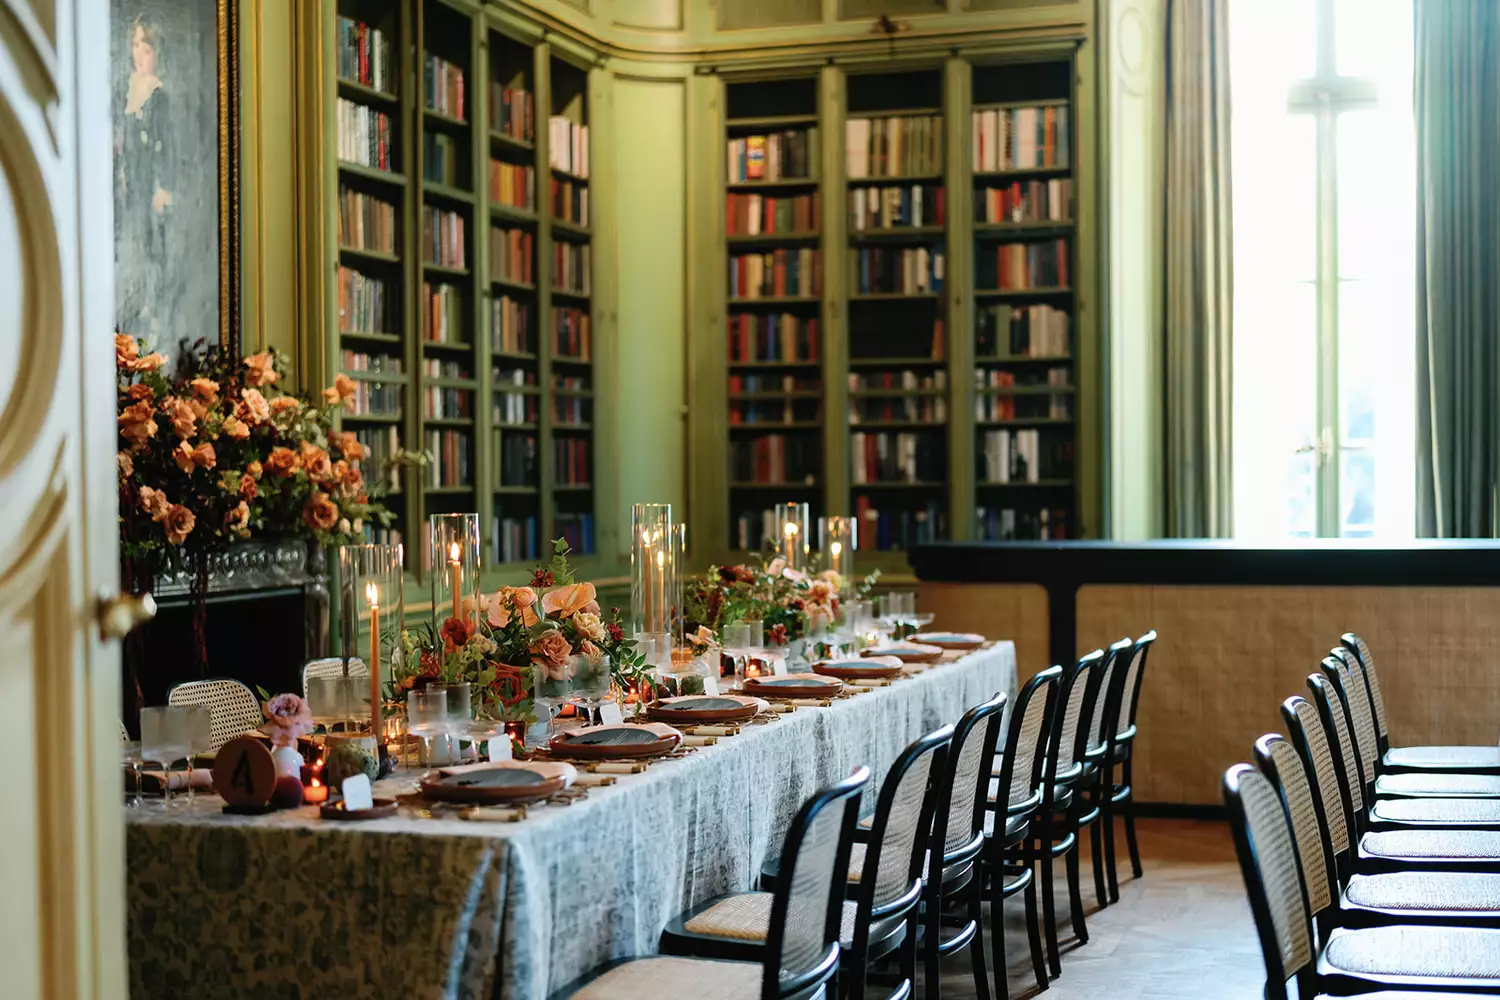 dinner table setting inside of a library